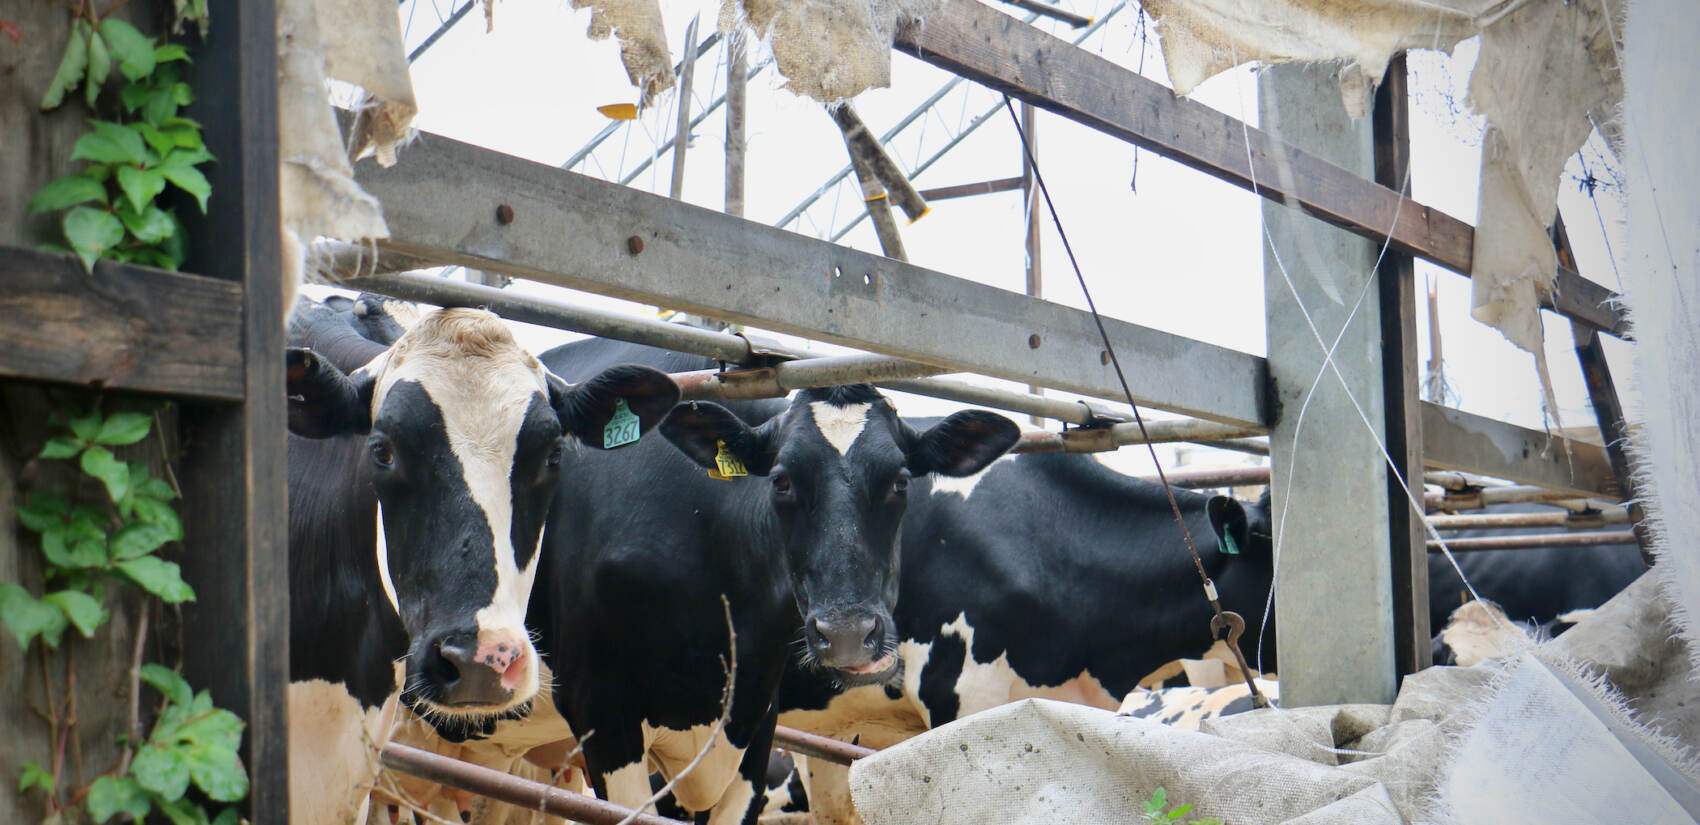 Cows on Wellacrest Farm in Mullica Hill, N.J., peer out of their damaged shelter a week after a tornado swept through, heavily damaging the farm's structures and killing more than a dozen cows